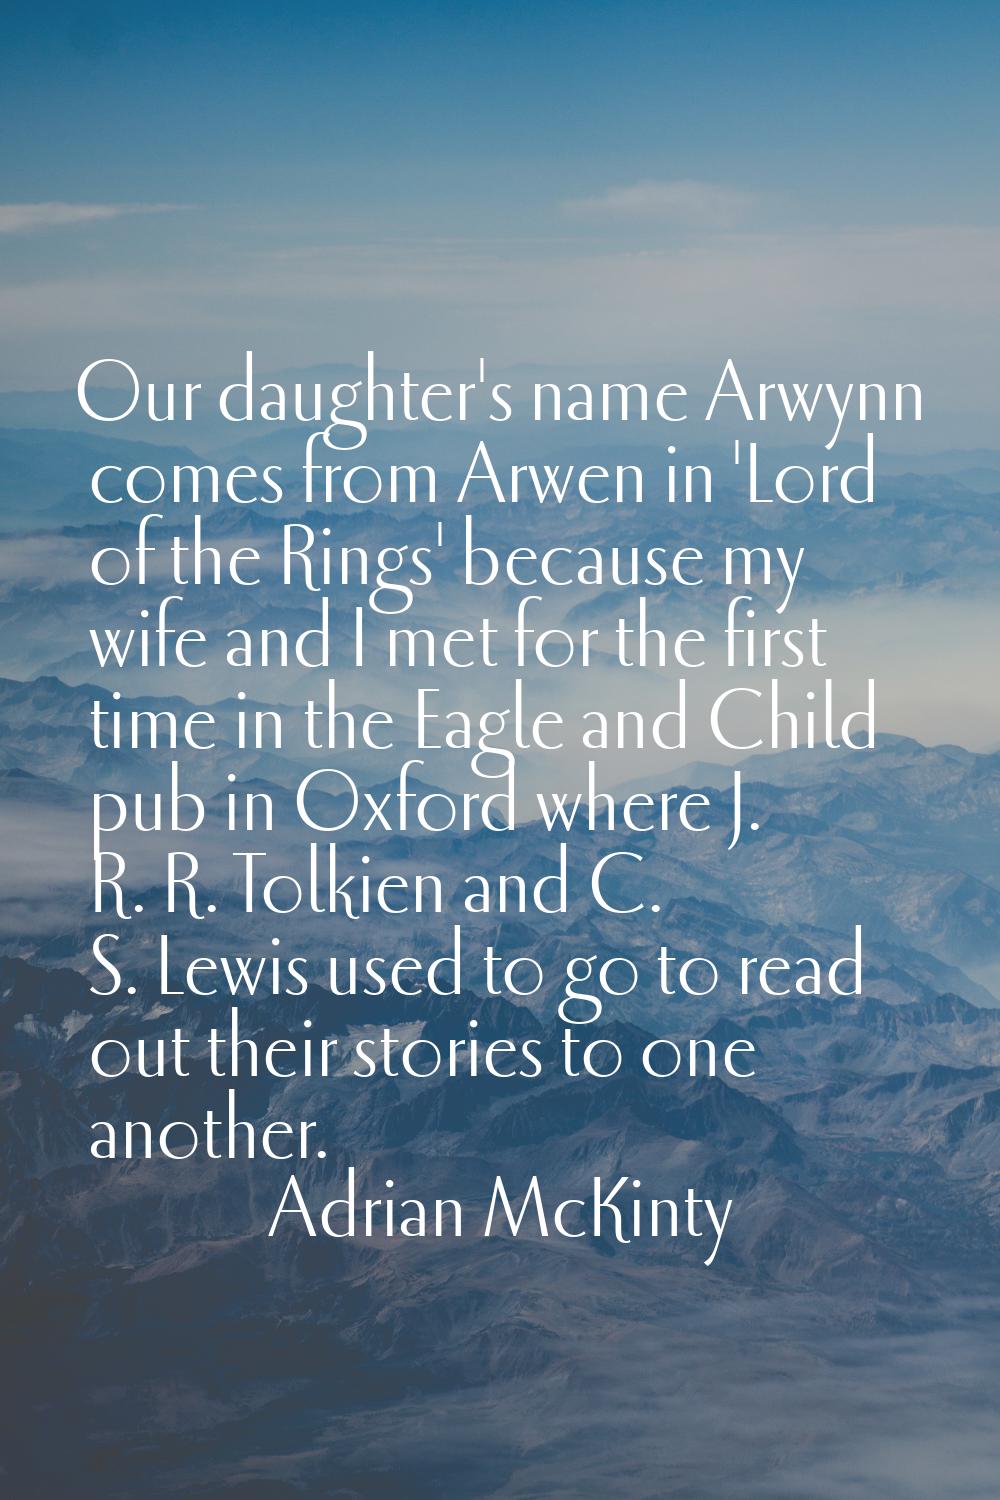 Our daughter's name Arwynn comes from Arwen in 'Lord of the Rings' because my wife and I met for th